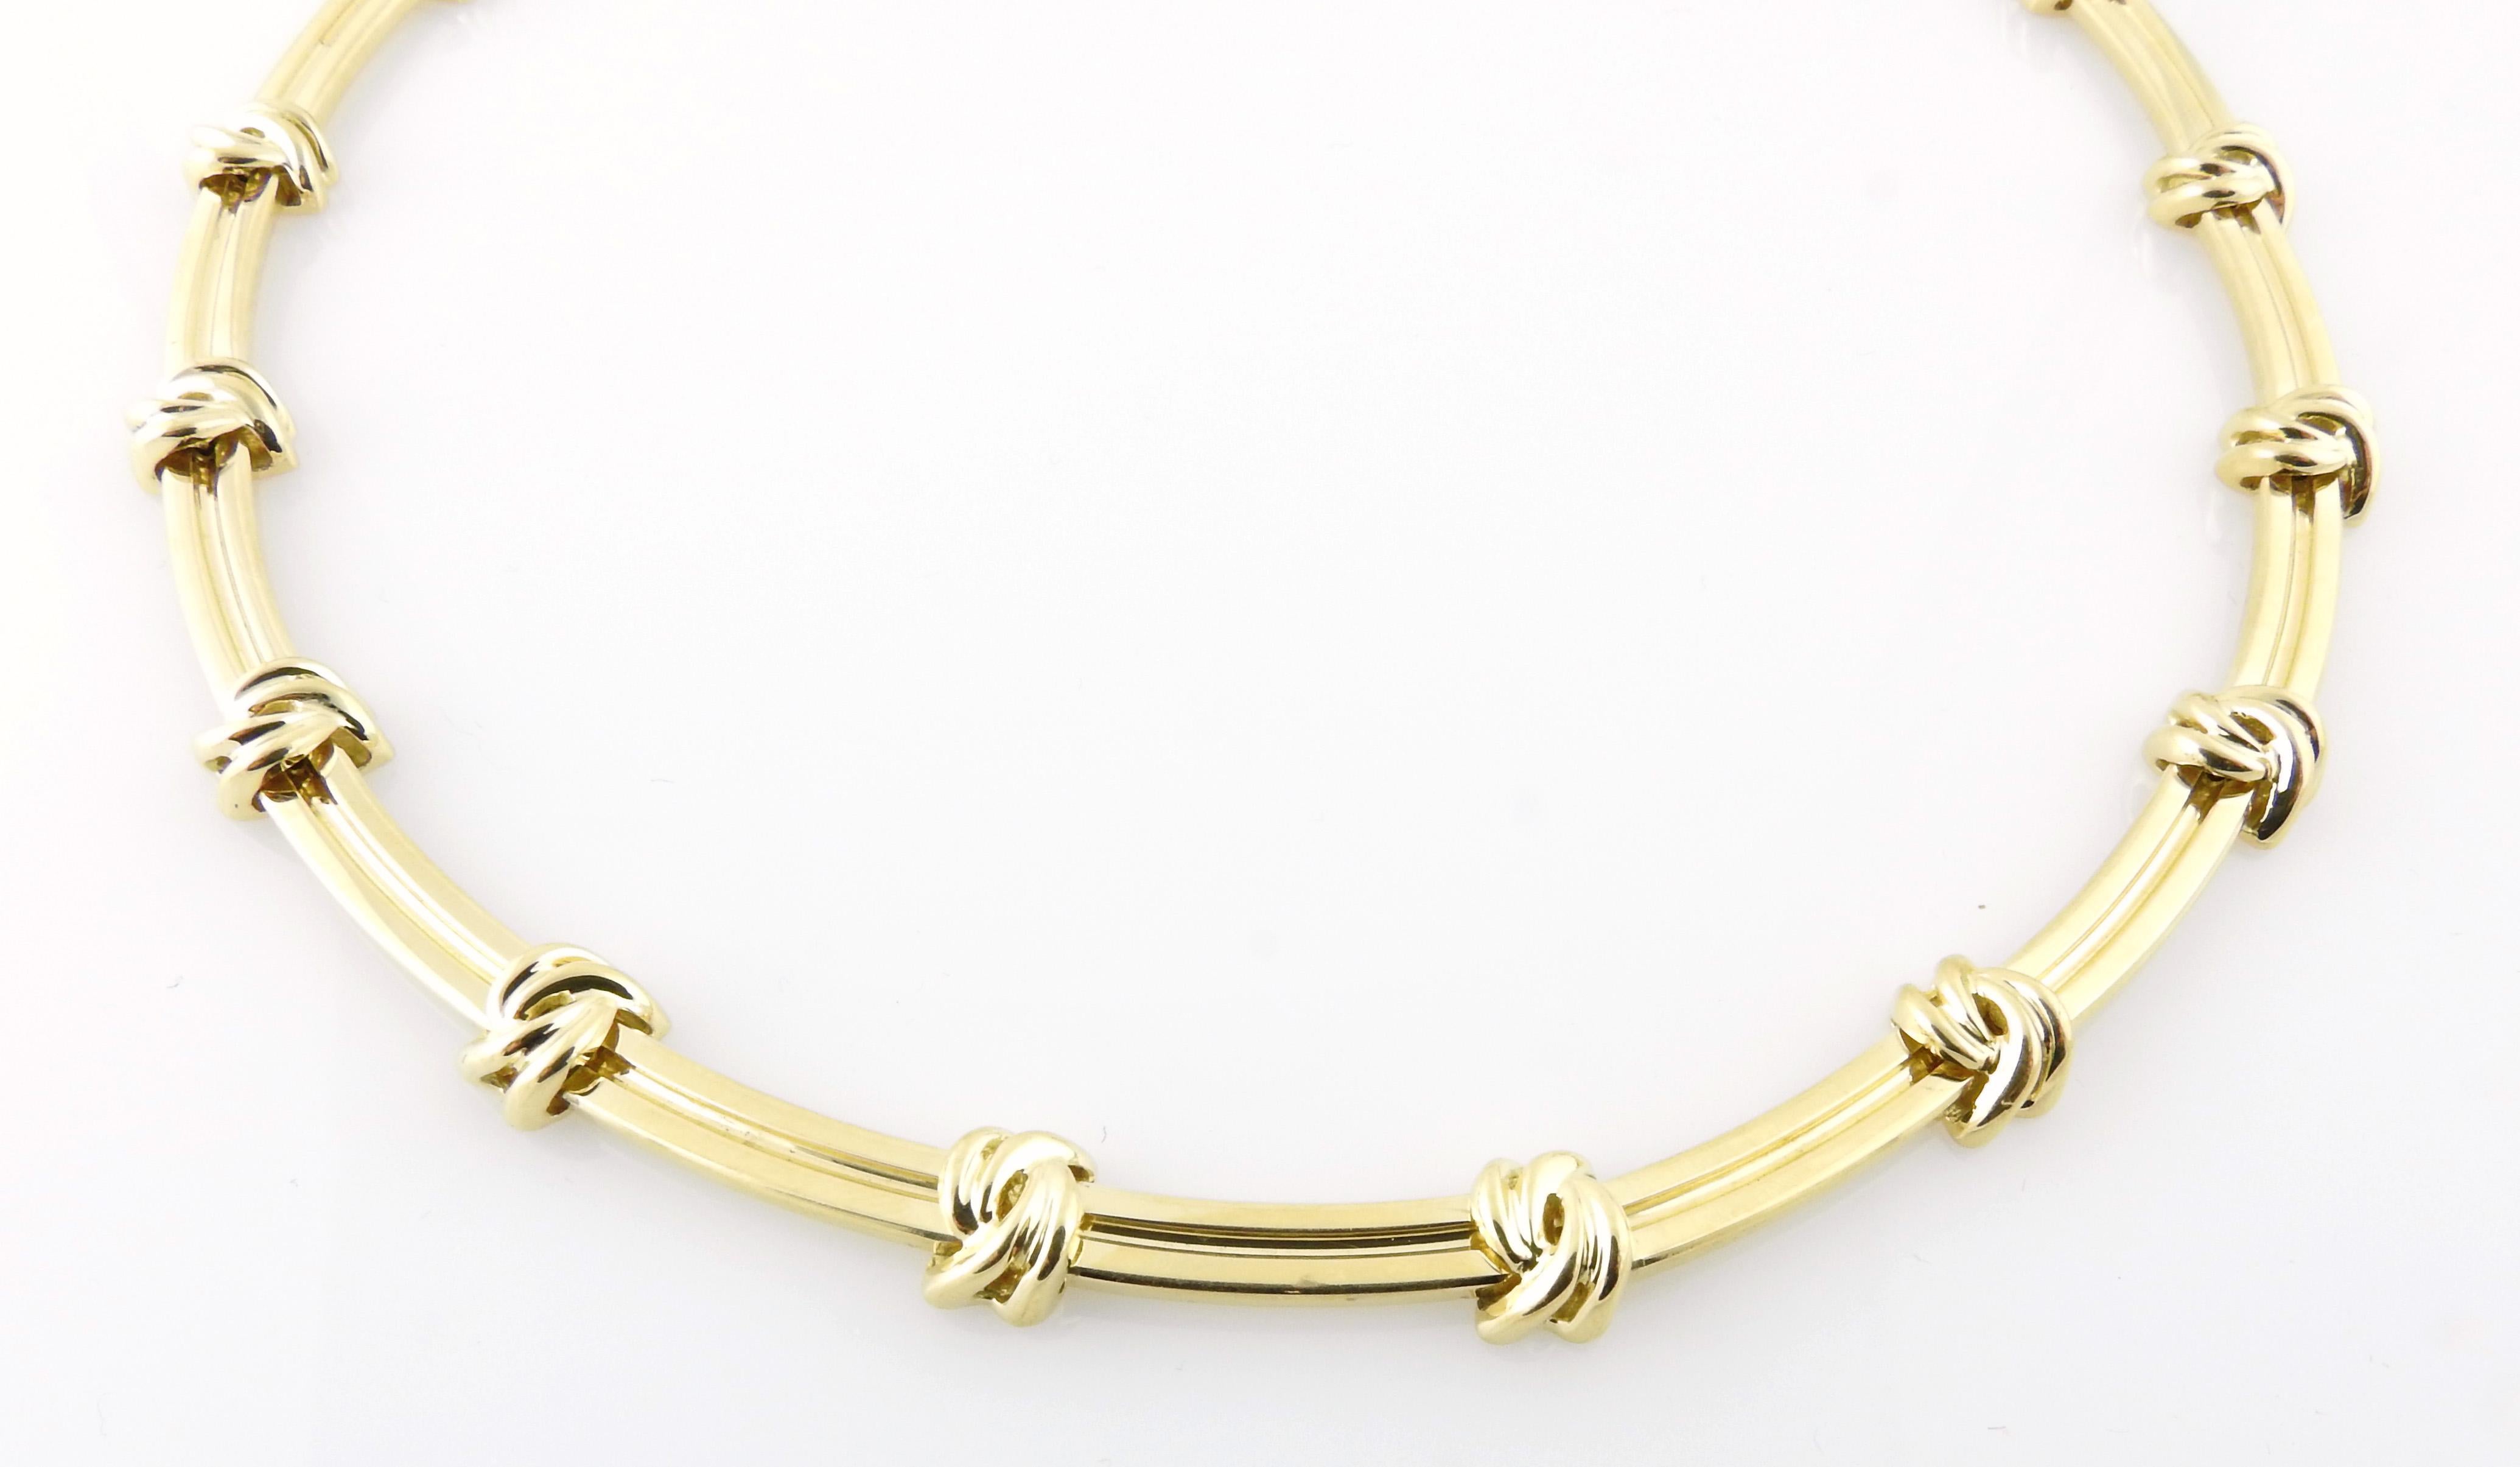 Tiffany & Co. 18K Yellow Gold Love Knot Groove Link Choker

This beautiful Tiffany & Co. Choker is set in 18K Yellow Gold

approx. 15.5